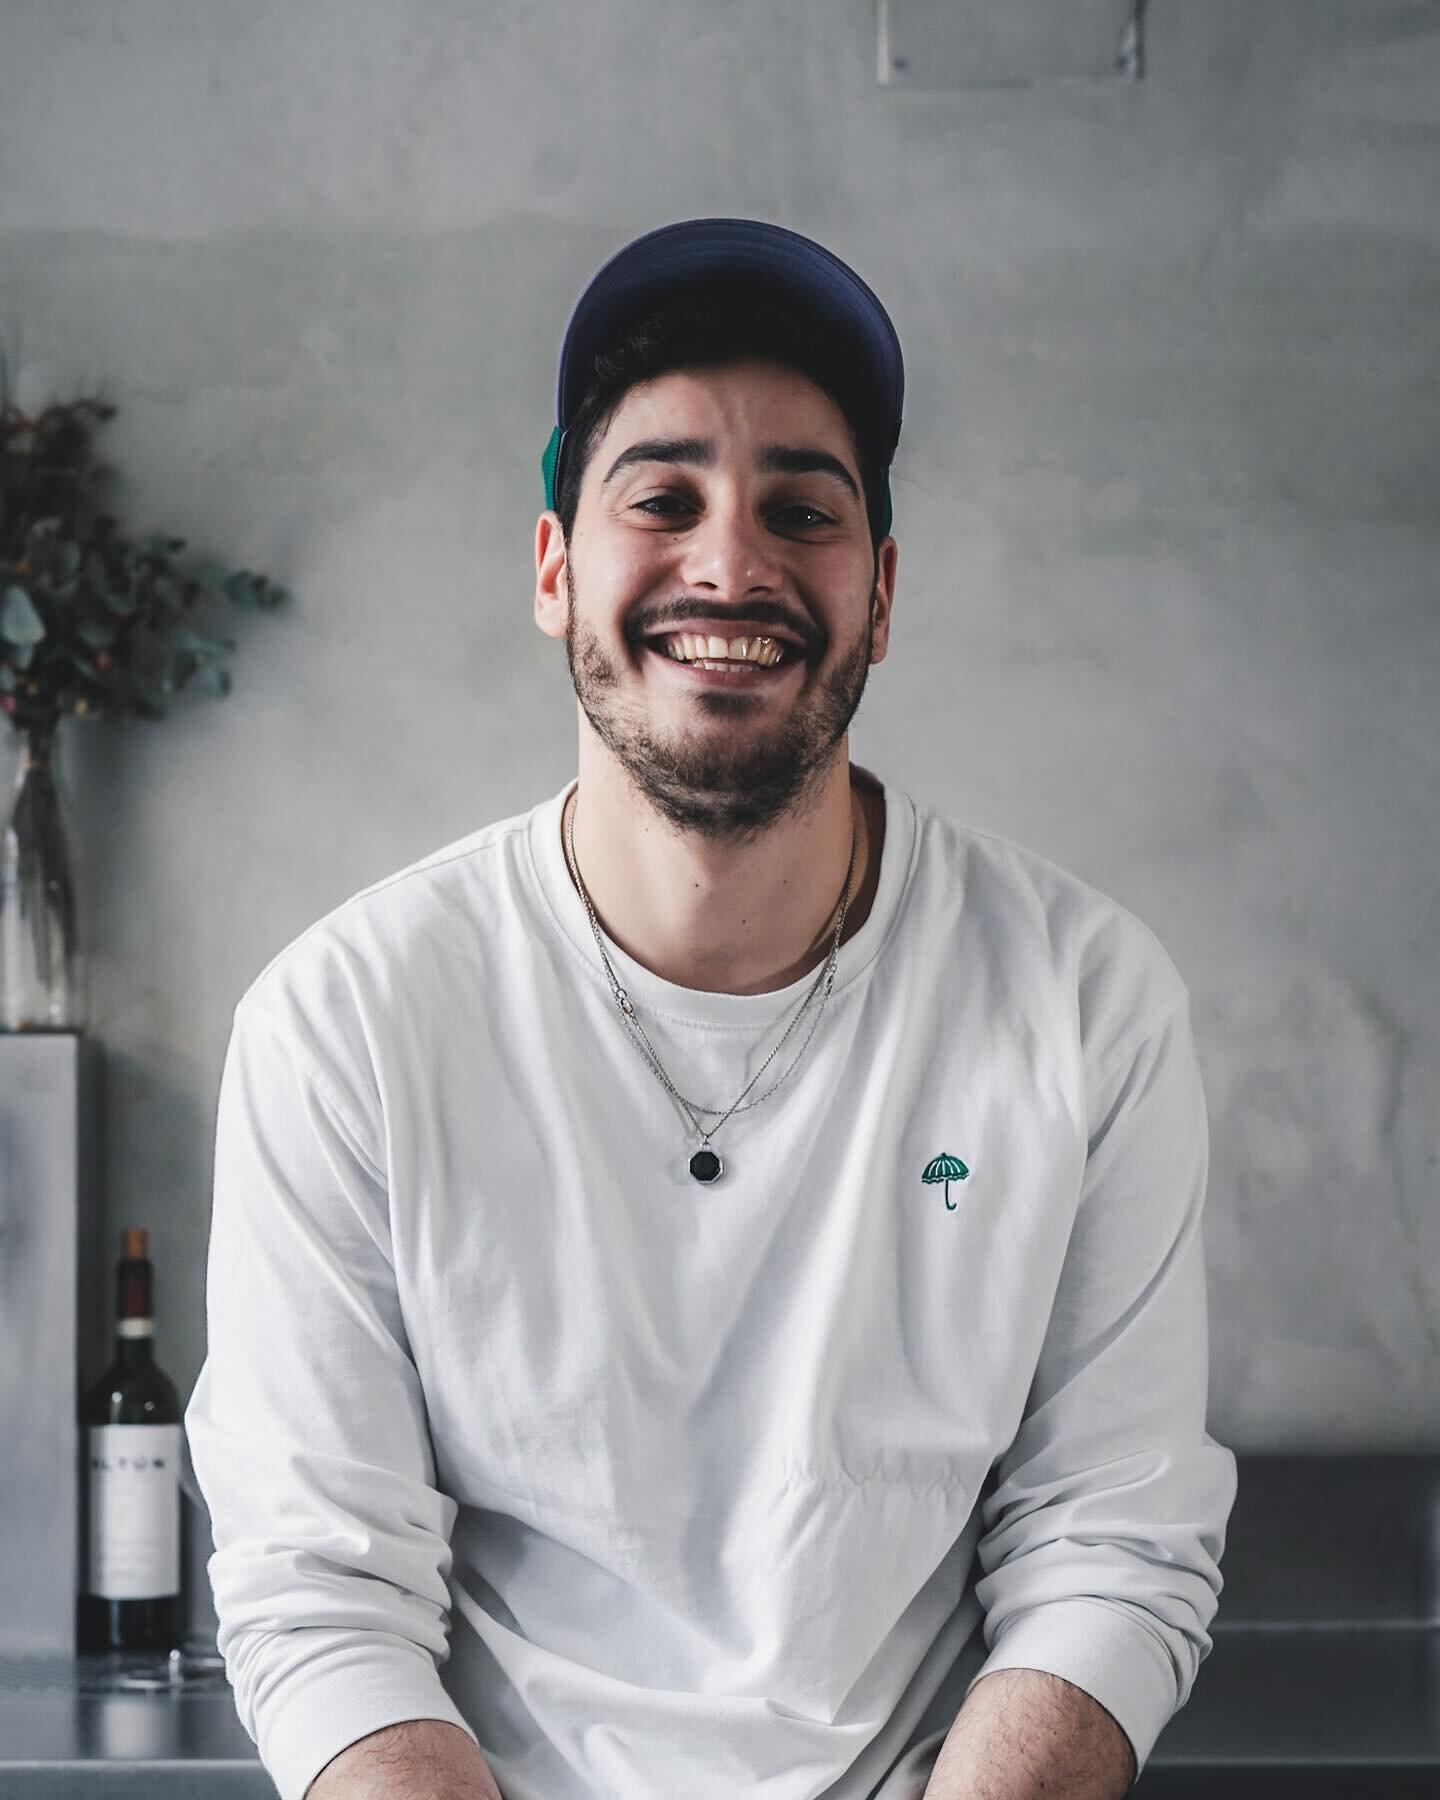 🇦🇹 🇹🇷

NEHIRIOUS 

NEHIR JOINED US BACK END OF LAST YEAR, AND IT&rsquo;S ALREADY BEEN AMACCCIINNGGG

HE&rsquo;S MADE THIS HOUSE HIS HOME, IT&rsquo;S IMPOSSIBLE TO STOP THIS GUY SMILING 😐

#cocktail #cocktails #bar #bartender #50bestbars #barcelo